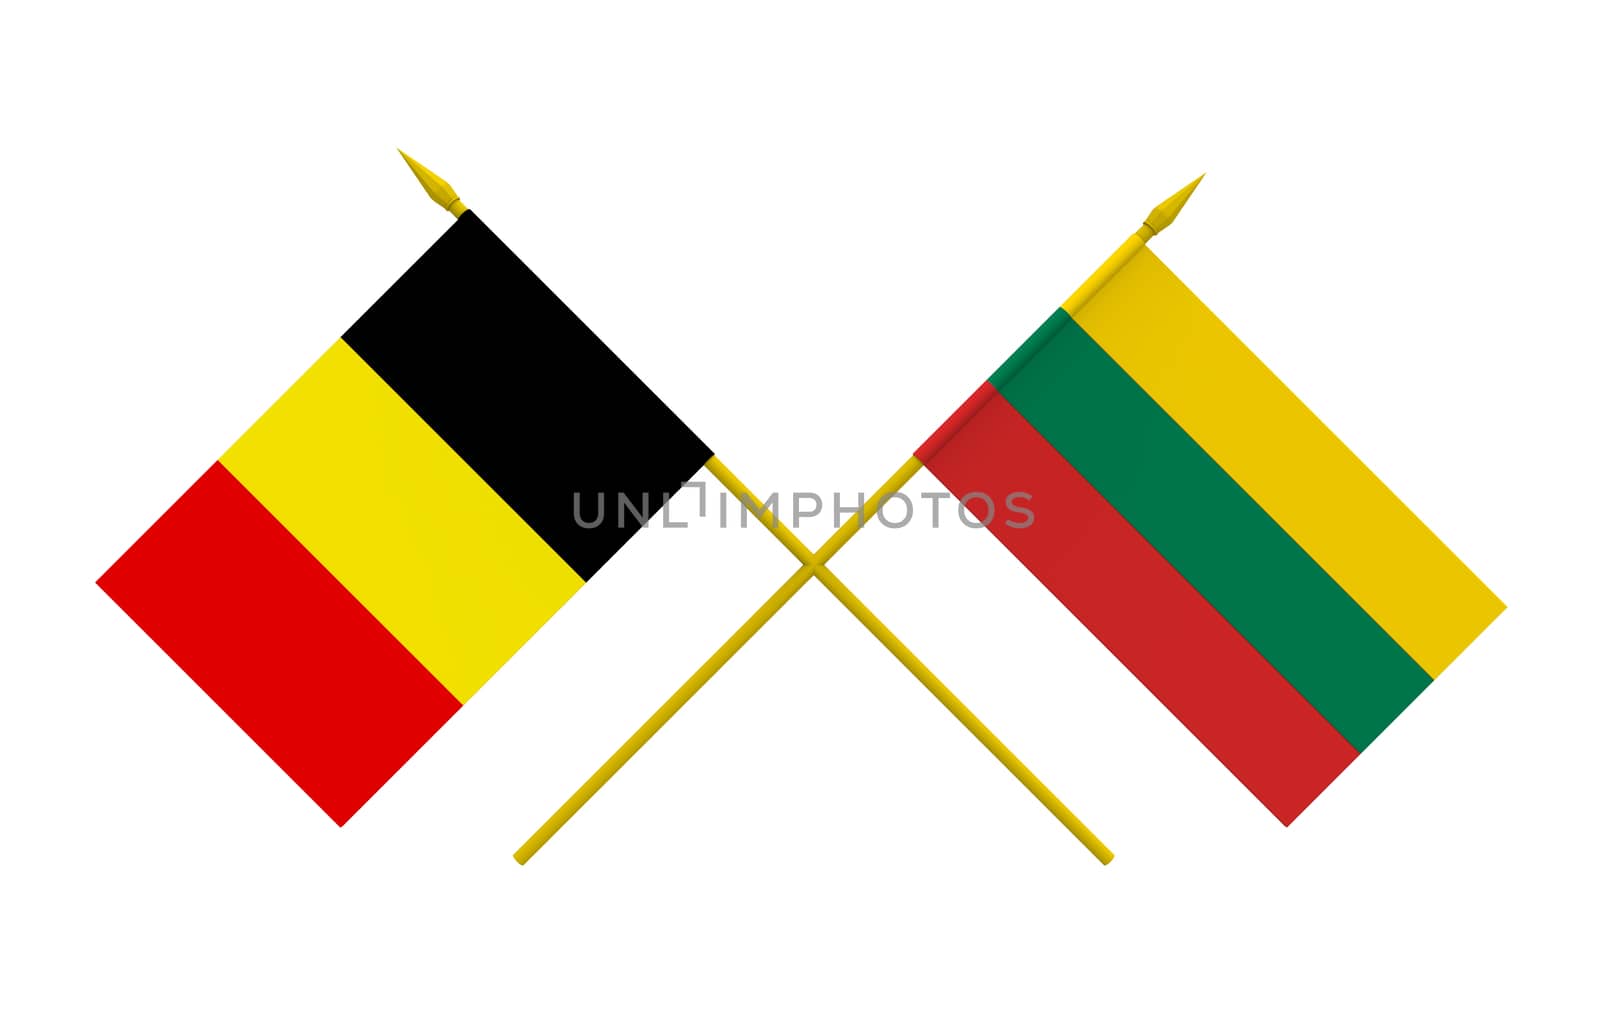 Flags of Belgium and Lithuania, 3d render, isolated